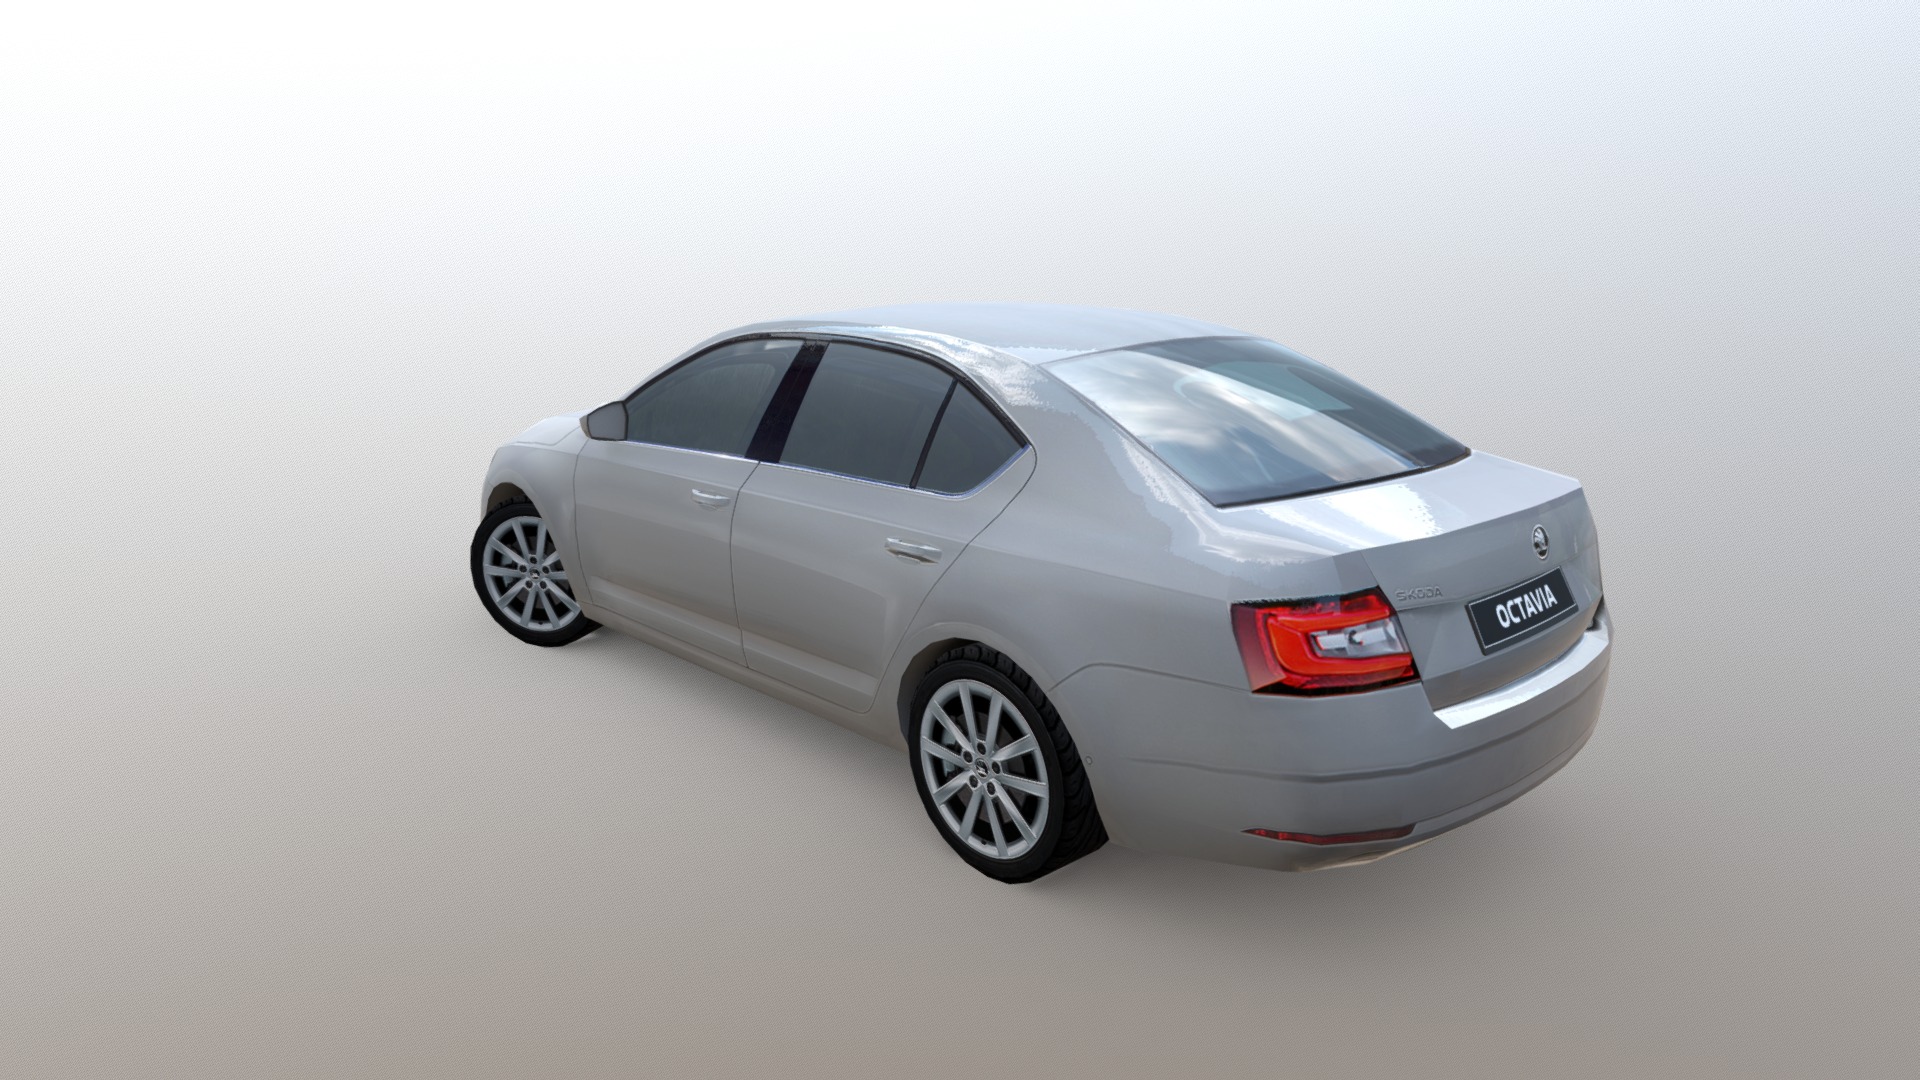 3D model Škoda Octavia 2017 - This is a 3D model of the Škoda Octavia 2017. The 3D model is about a silver car with a white background.